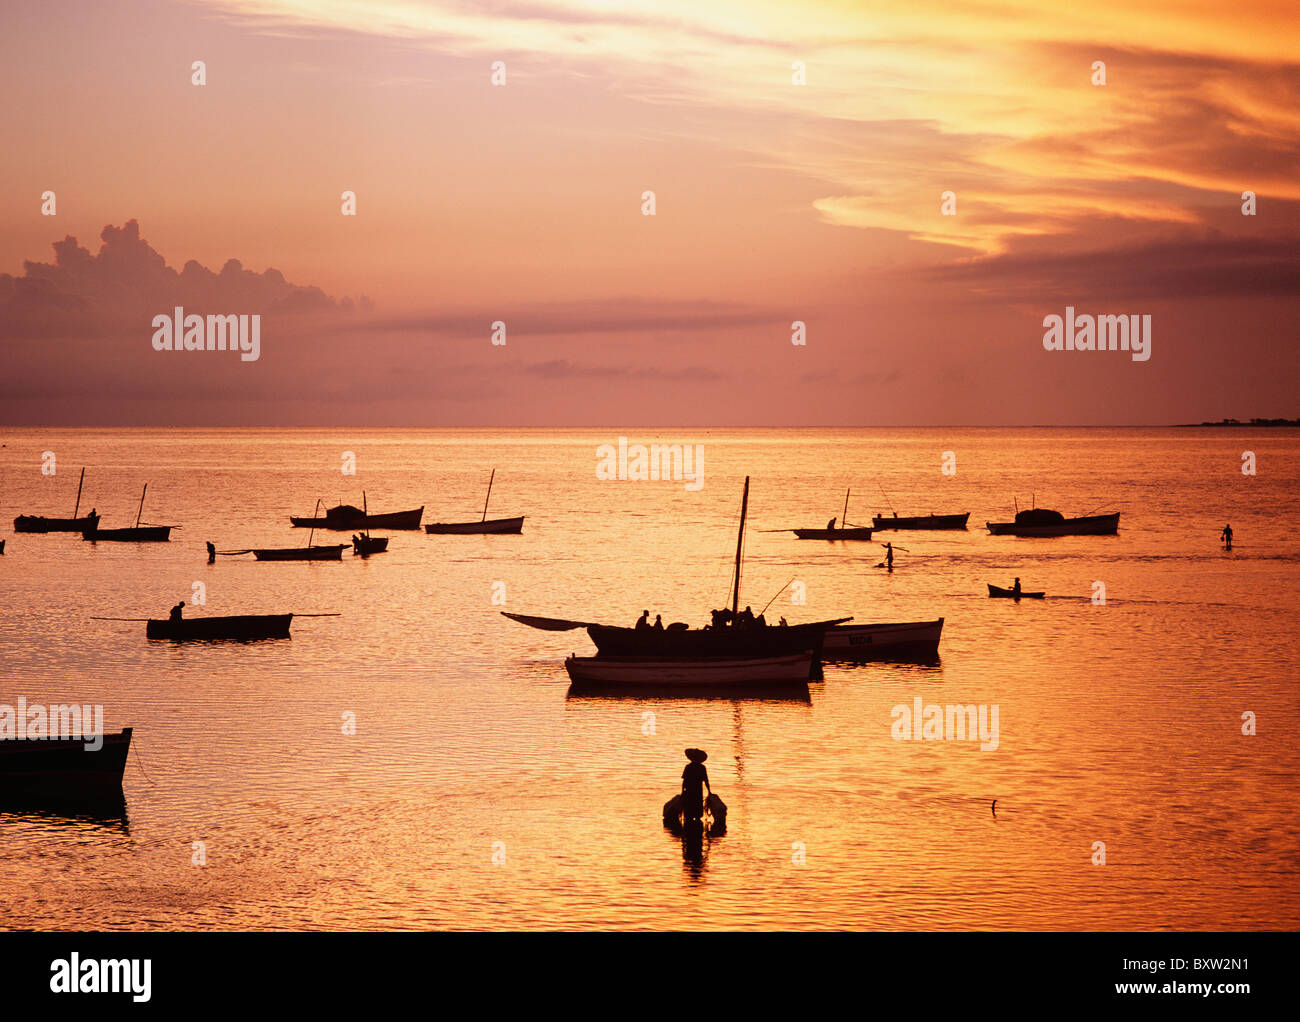 Fishermen Preparing Their Dhows Before Heading Out To Sea At Dawn Stock Photo